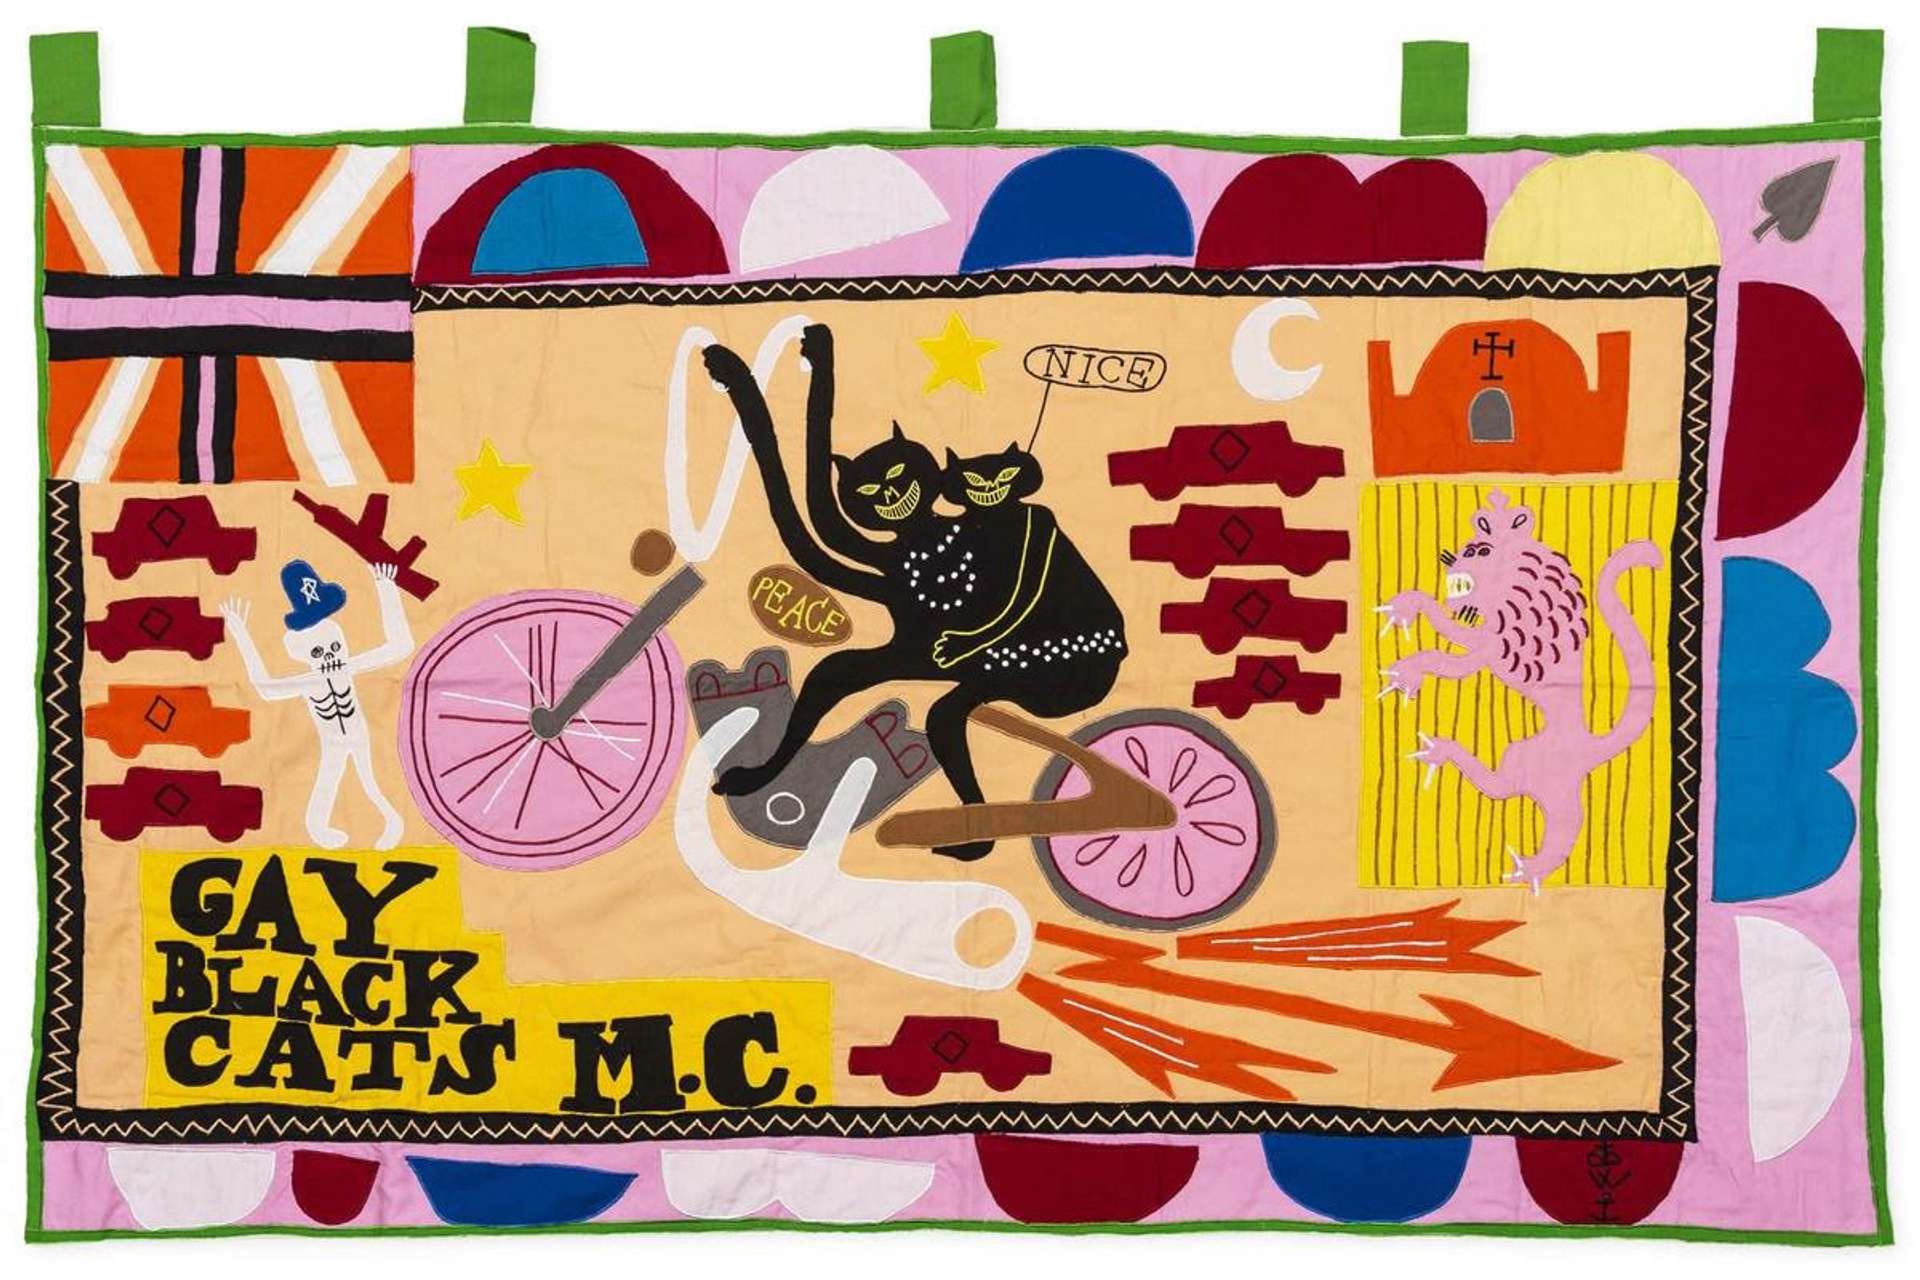 Gay Black Cats MC - Embroidery by Grayson Perry 2017 - MyArtBroker